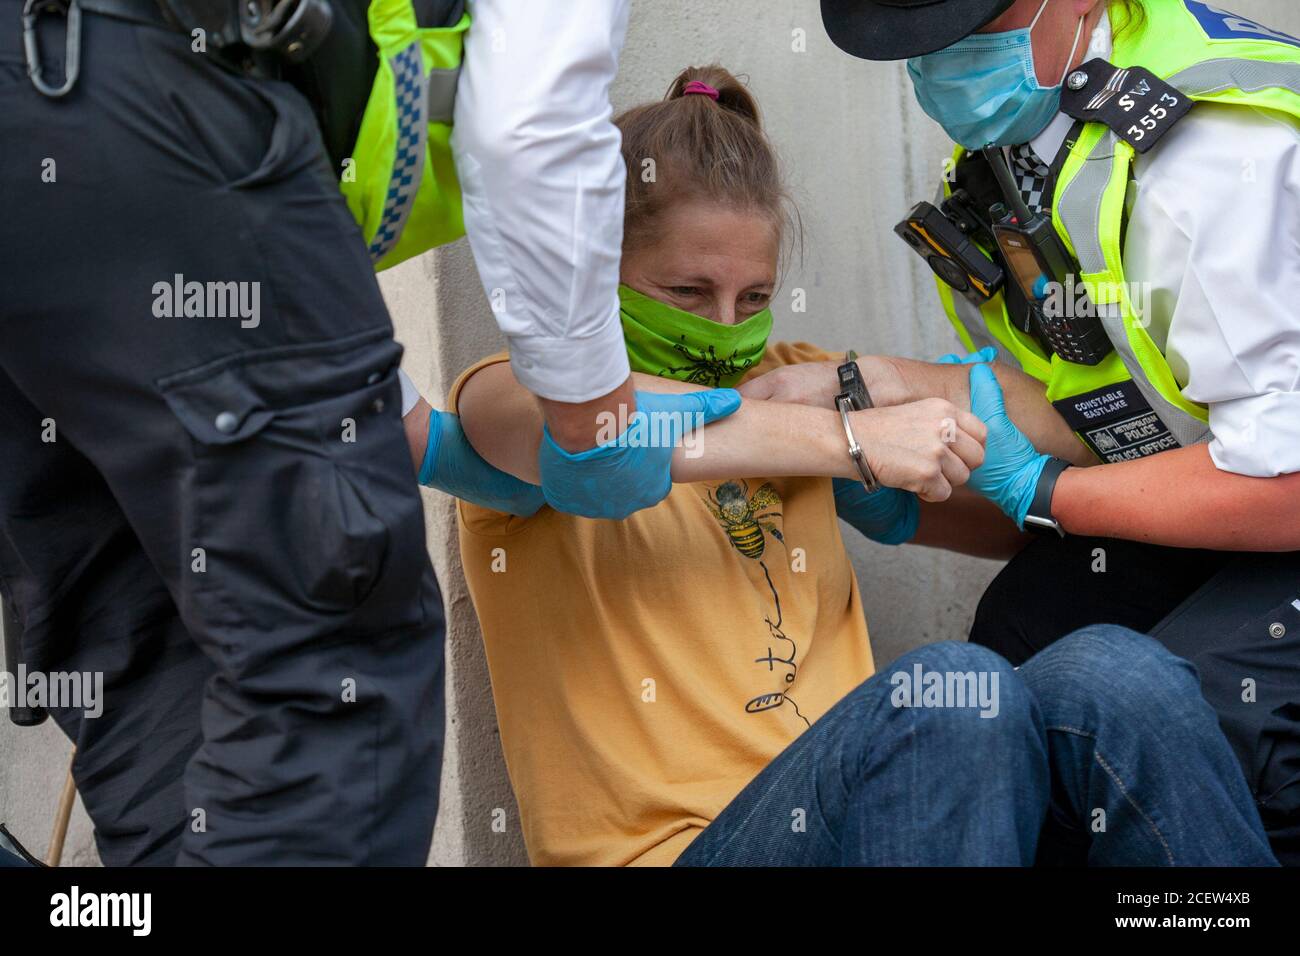 London, UK. 2nd September 2020. Extinction Rebellion protester, in handcuffs, is helped to her feet by police after being arrested, during the second day of demonstrations outside parliament. Frustrated with the government’s failure to act on the climate and ecological emergency, XR continue to protest for change. The Climate and Ecological Emergency Bill (CEE Bill), is the only concrete plan available to address this crisis, and so in their first week back in Parliament, XR demand the government Act Now and embrace this legislation. Credit: Neil Atkinson/Alamy Live News. Stock Photo